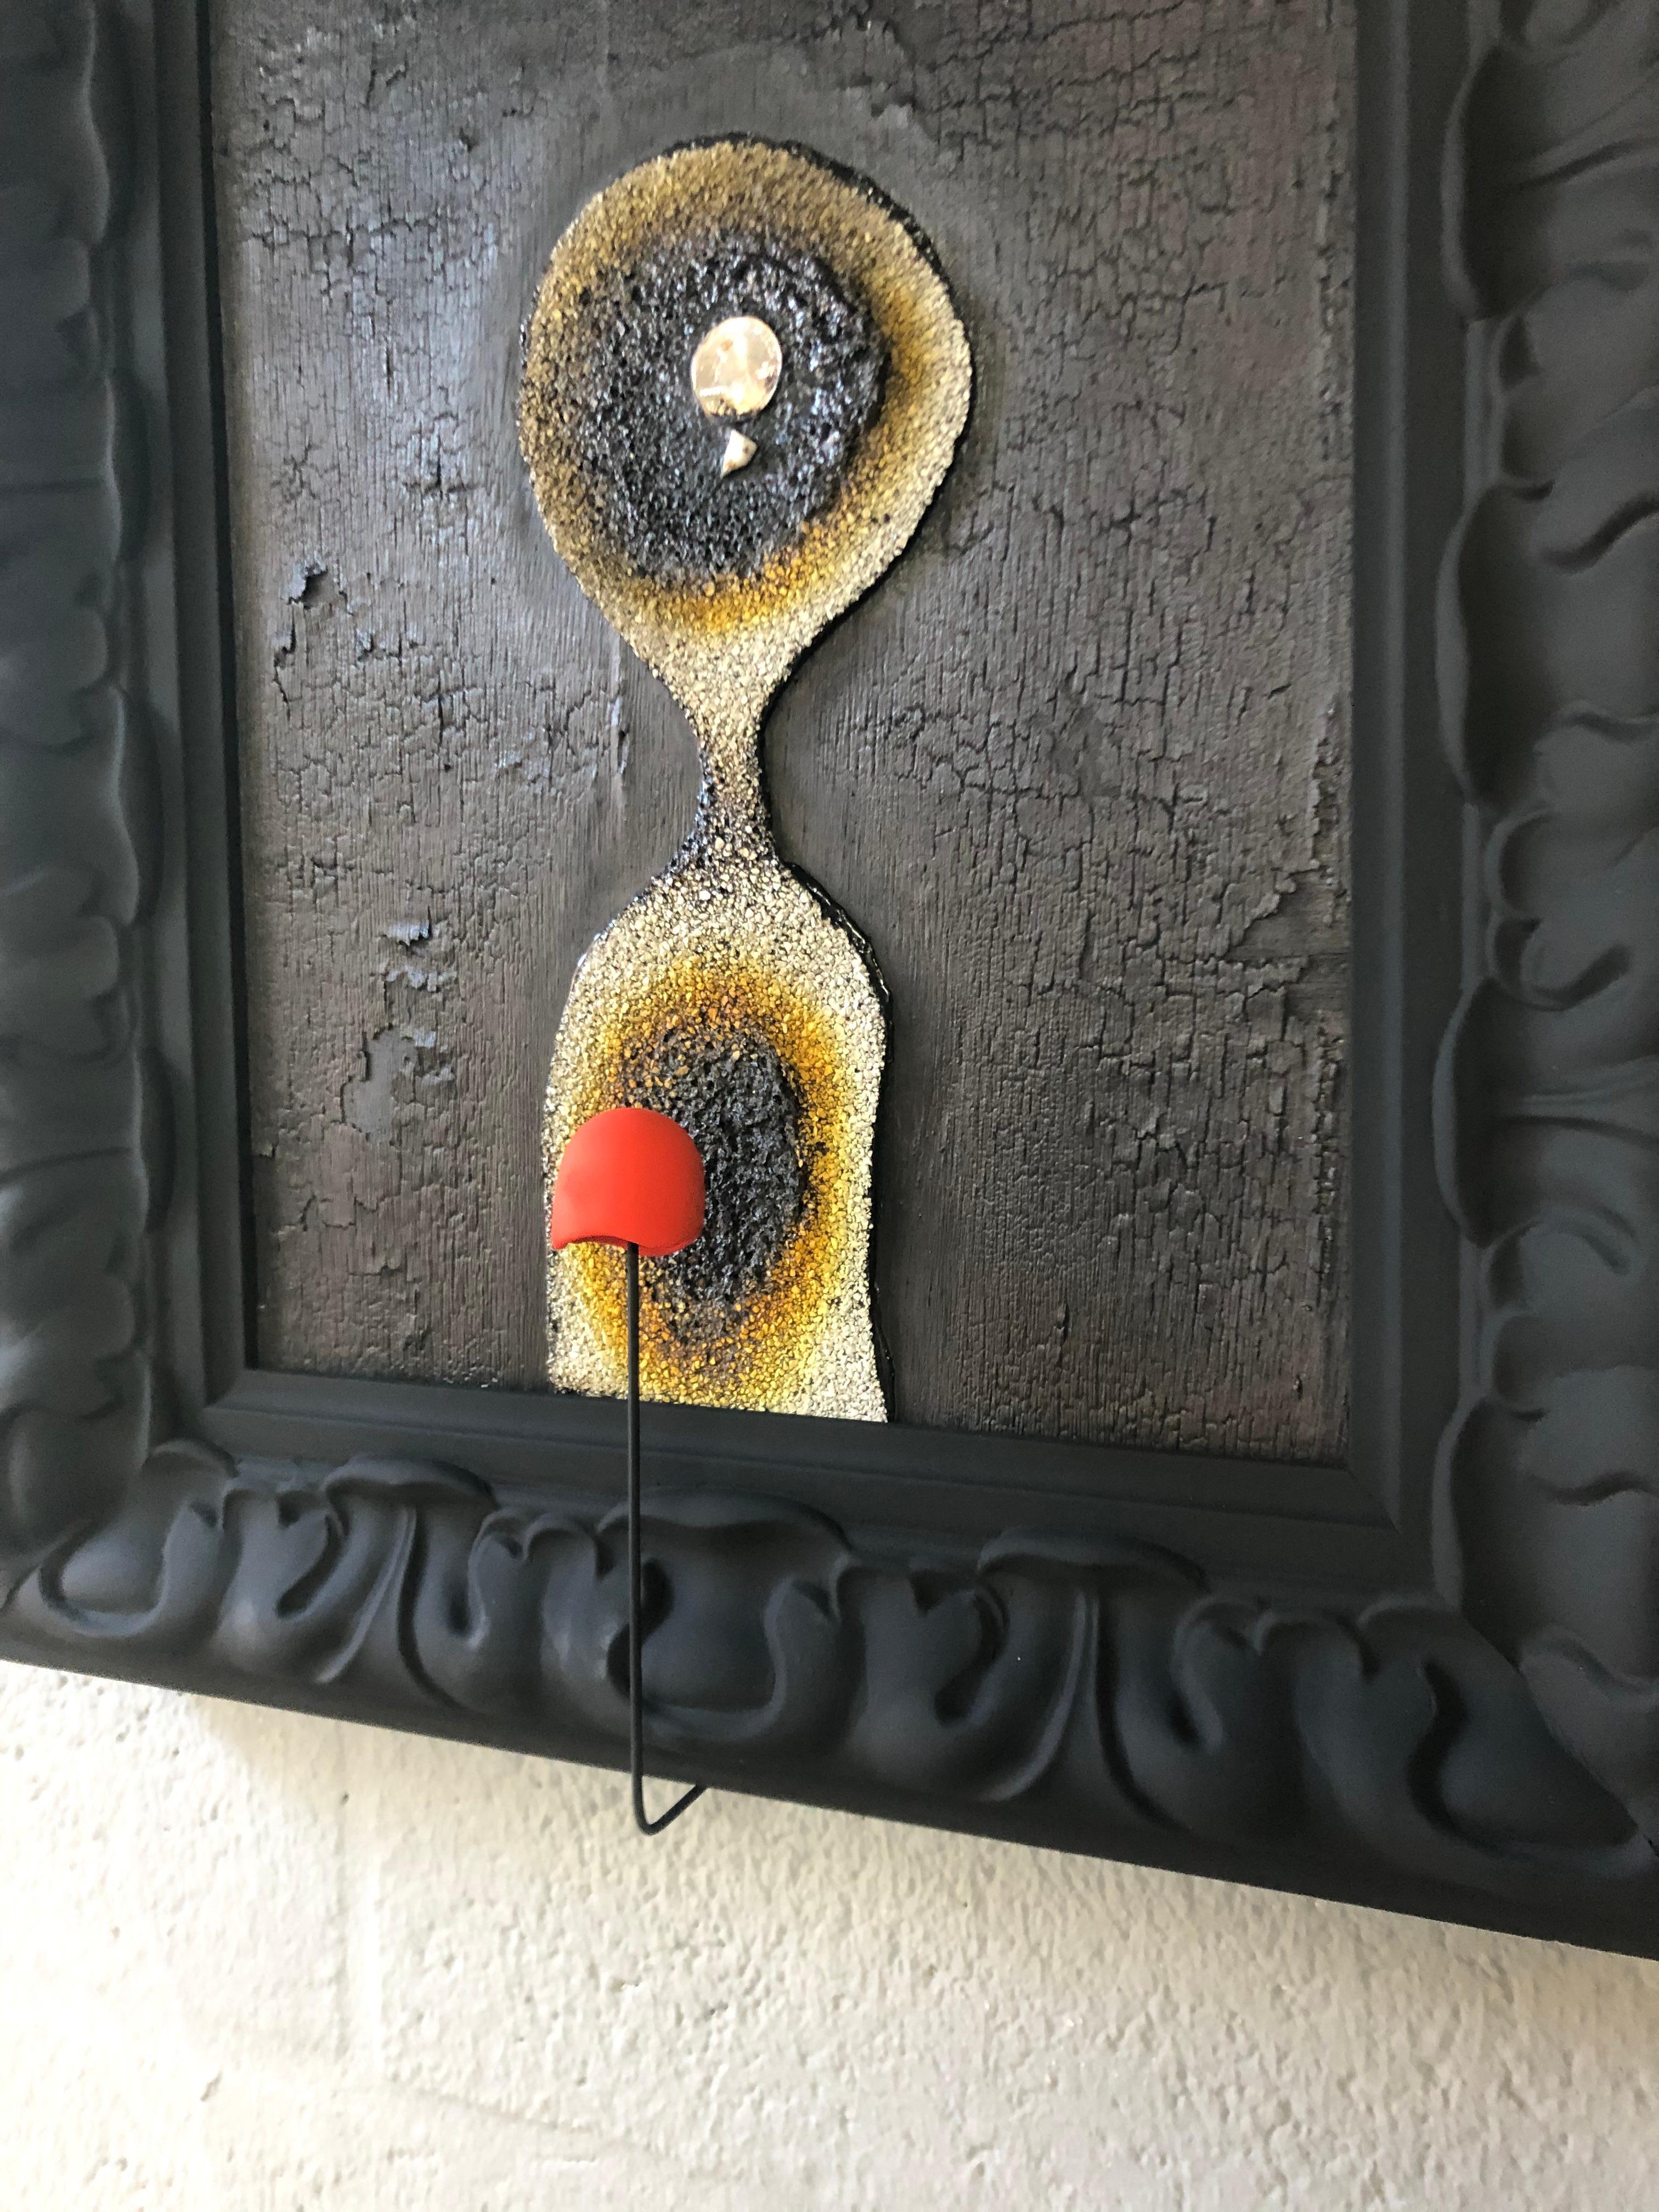 The Forgotten America.
 Mixed Media oil paint, tar, gravel. metal, resin on wood panel artist unique style and technic, the frame is part of the artwork.
 Randi Grantham was born and raised in Las Vegas, Nevada. From this city emerged an artist